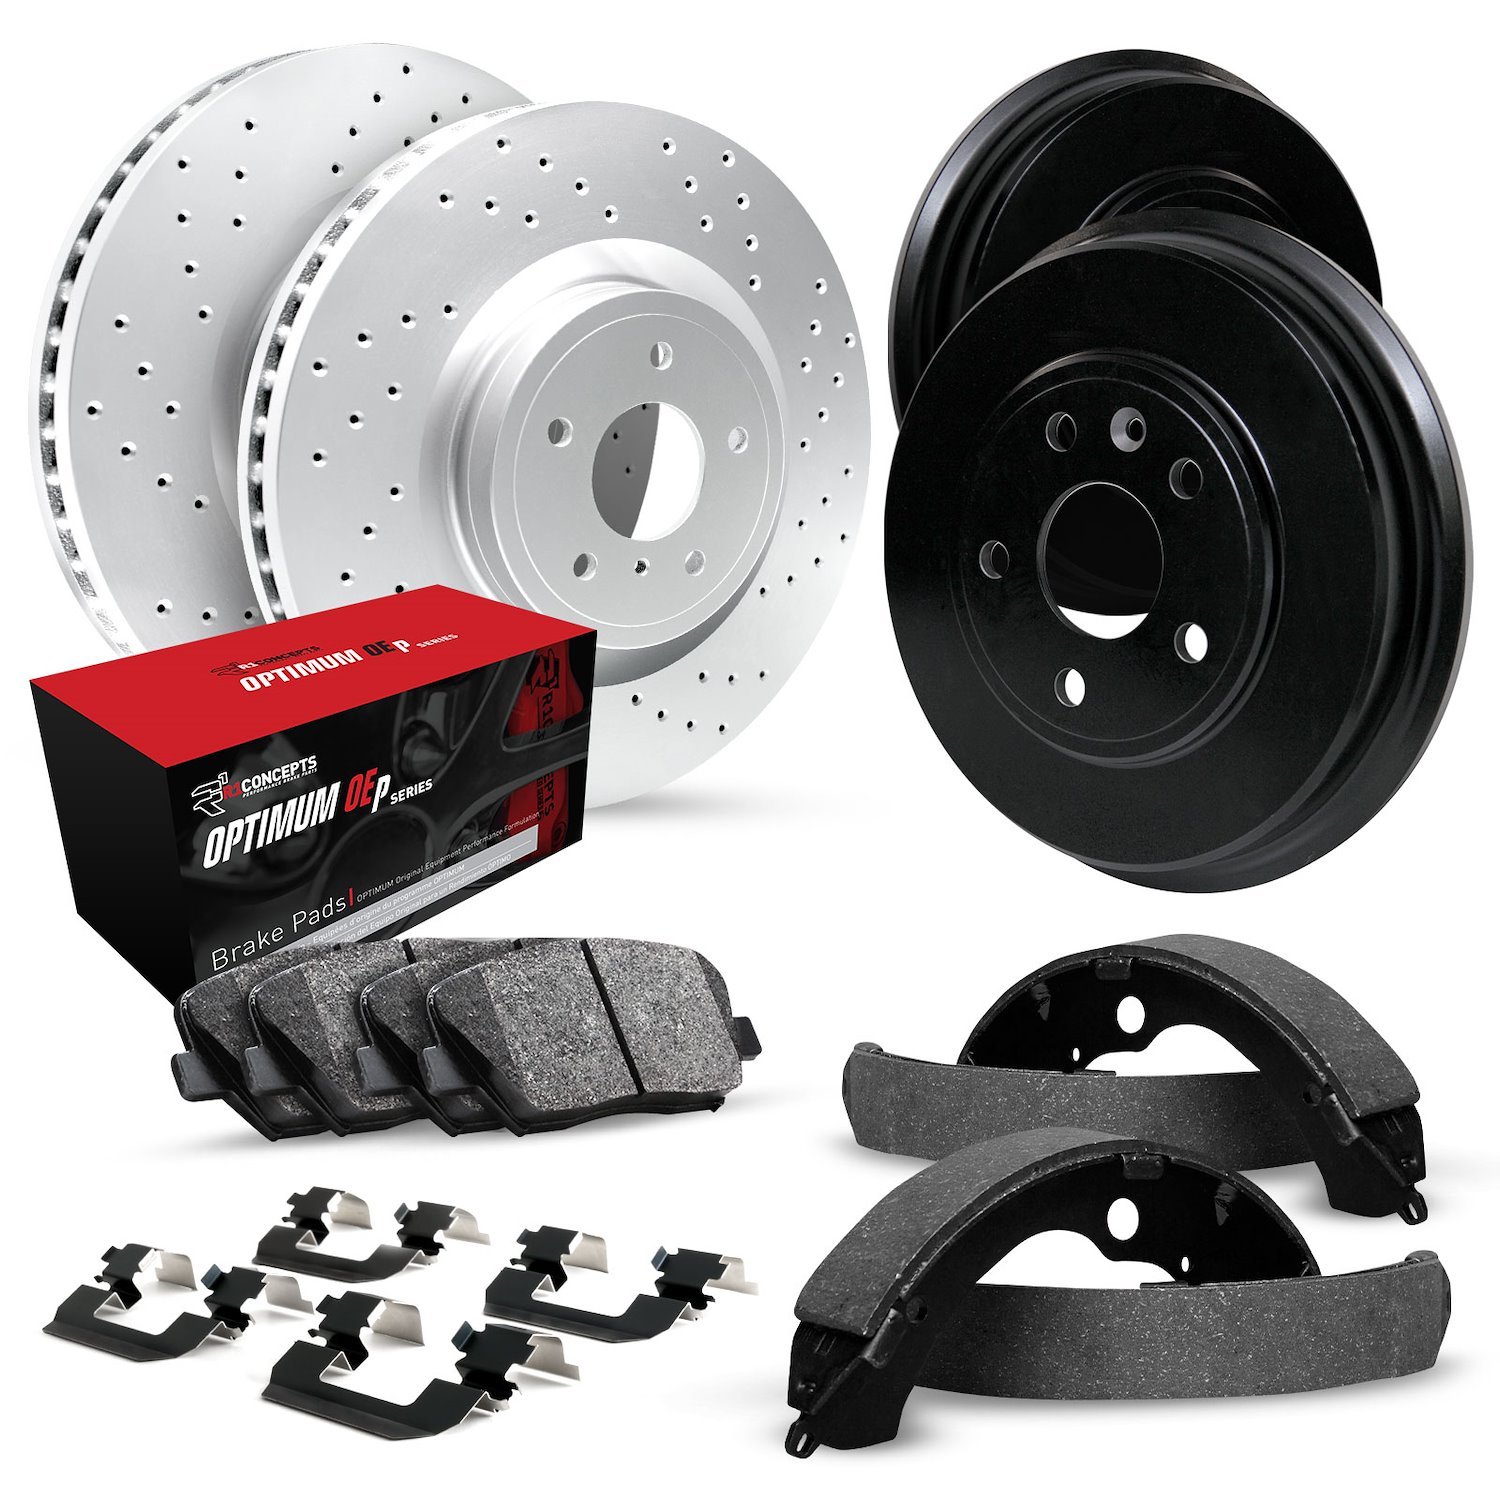 GEO-Carbon Drilled Brake Rotor & Drum Set w/Optimum OE Pads, Shoes, & Hardware, 1997-2005 GM, Position: Front & Rear